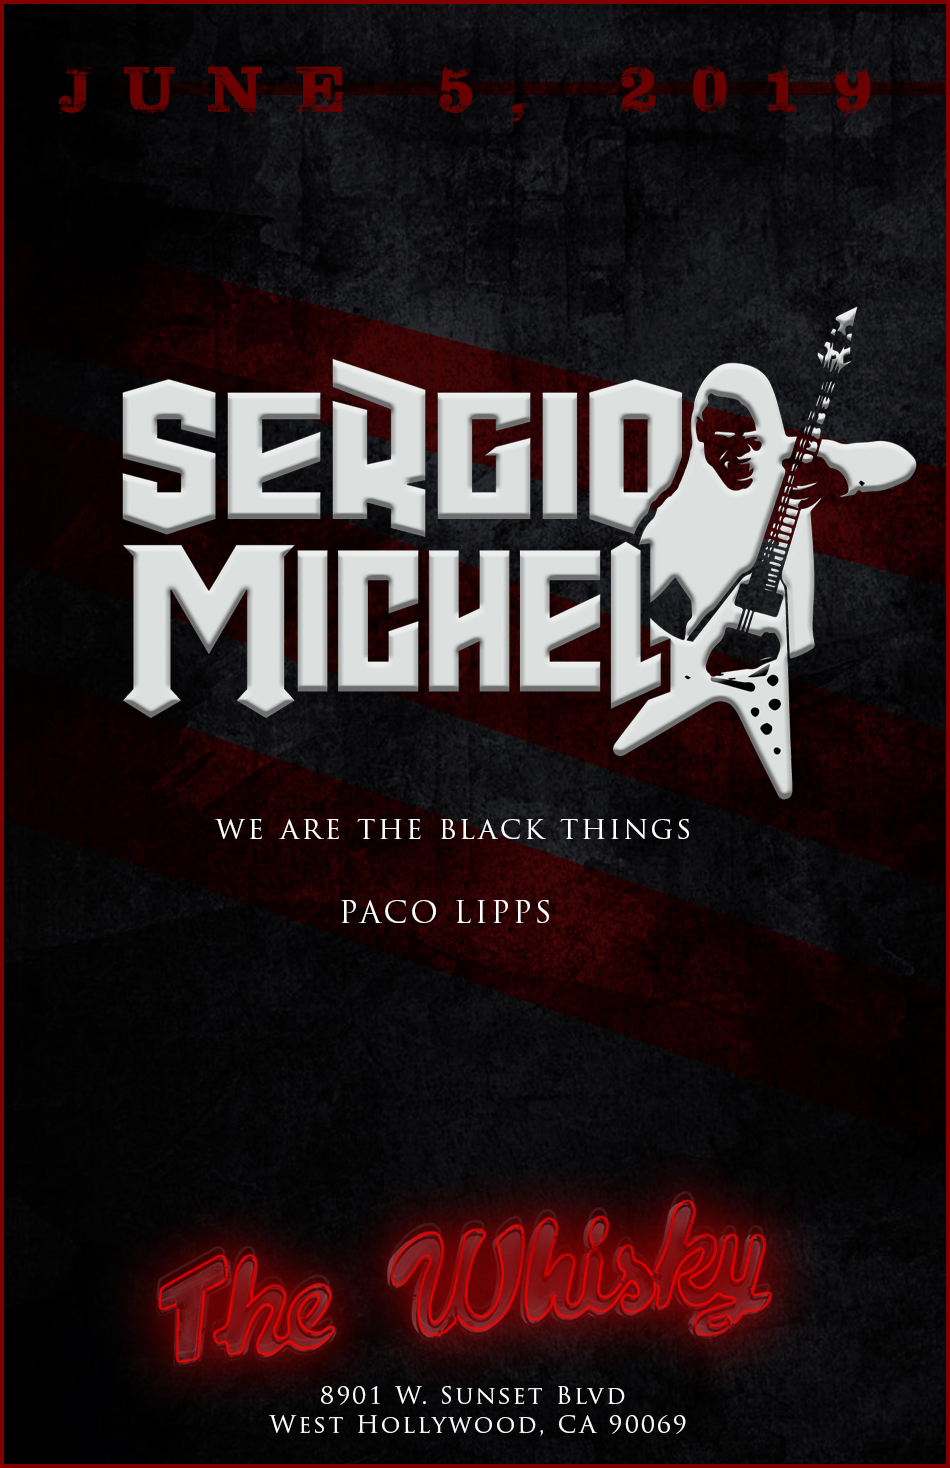 Sergio Michel, We Are The Black Things, Paco Lipps